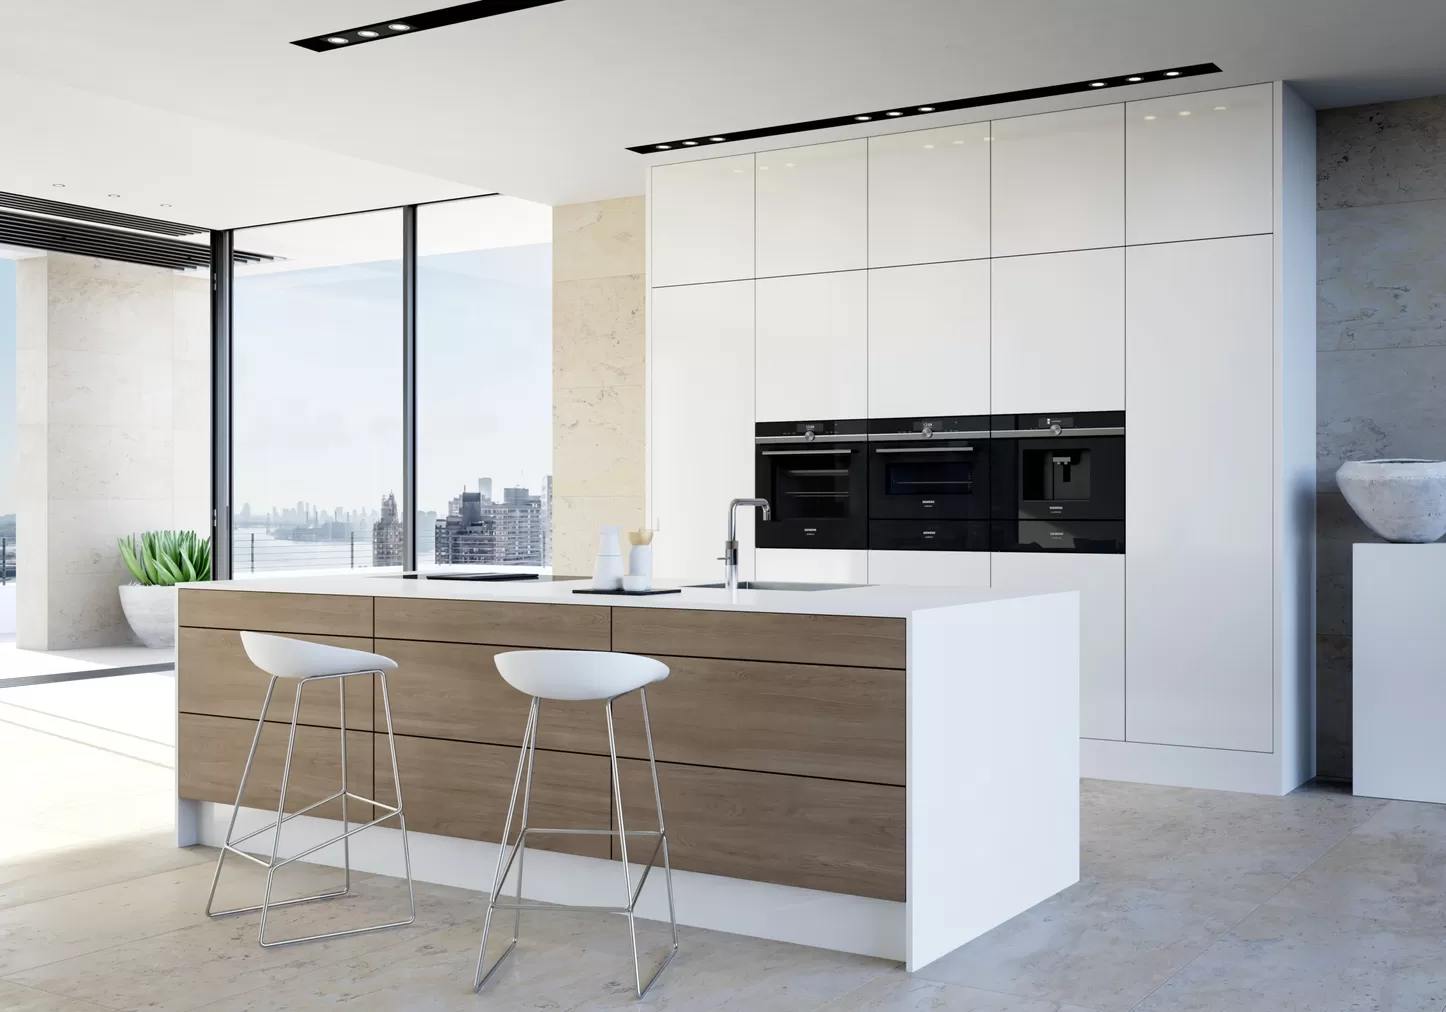 white kitchen with island, white chairs, black appliances, sink and window